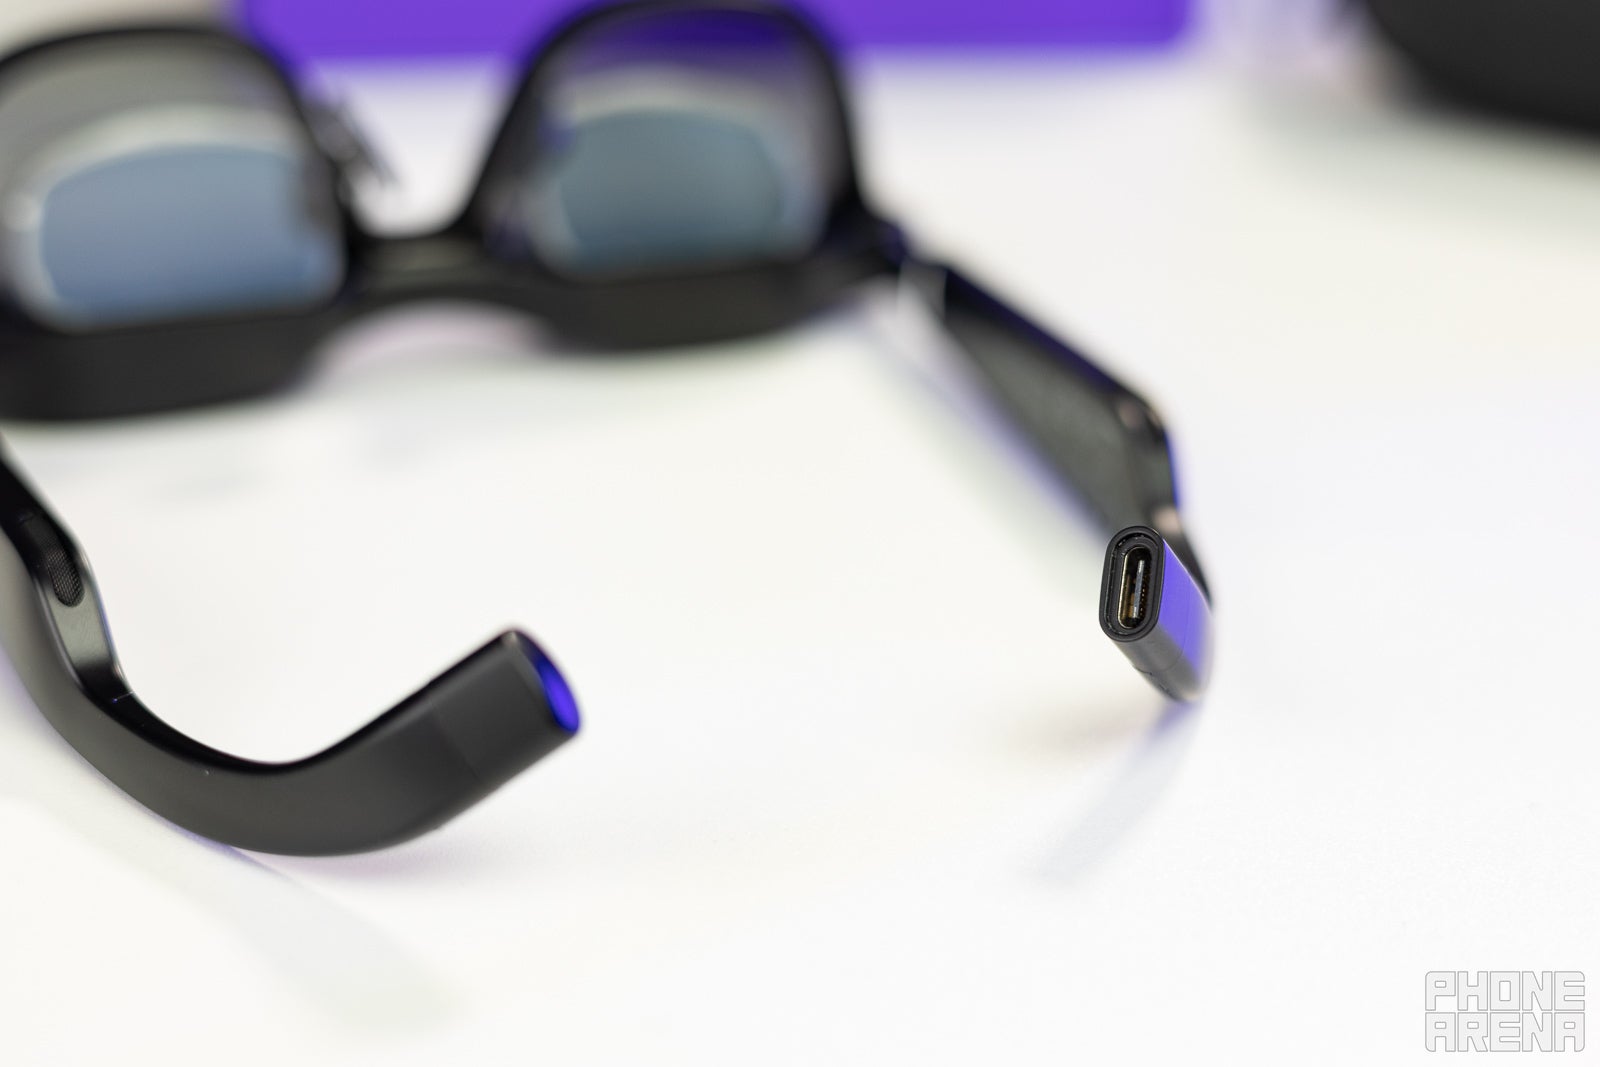 AR Glasses YOU will actually wear! - XREAL Air (formerly NREAL Air) 